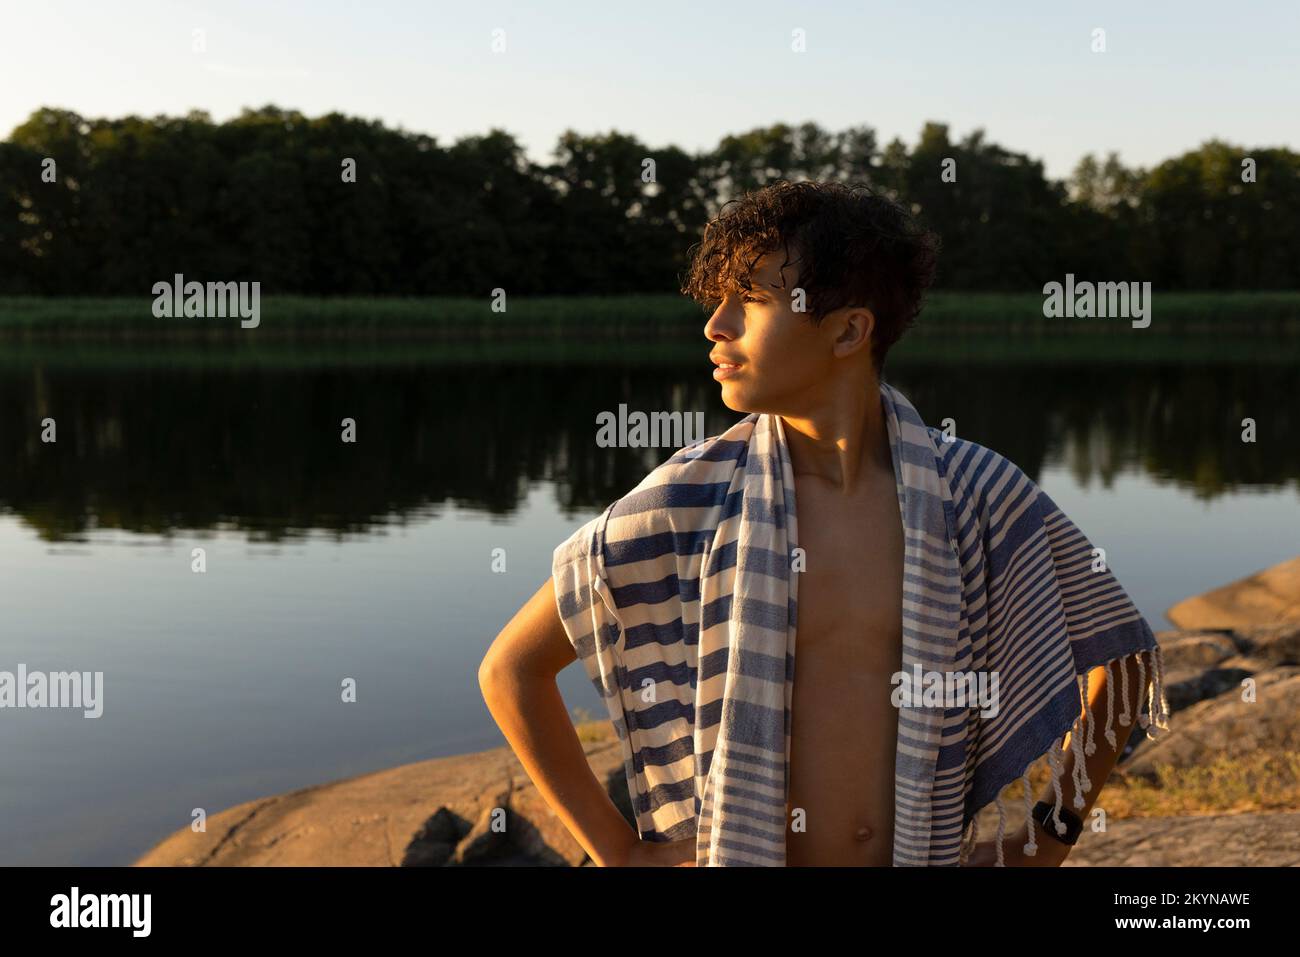 Teenage boy with towel looking away against lake during sunset Stock Photo